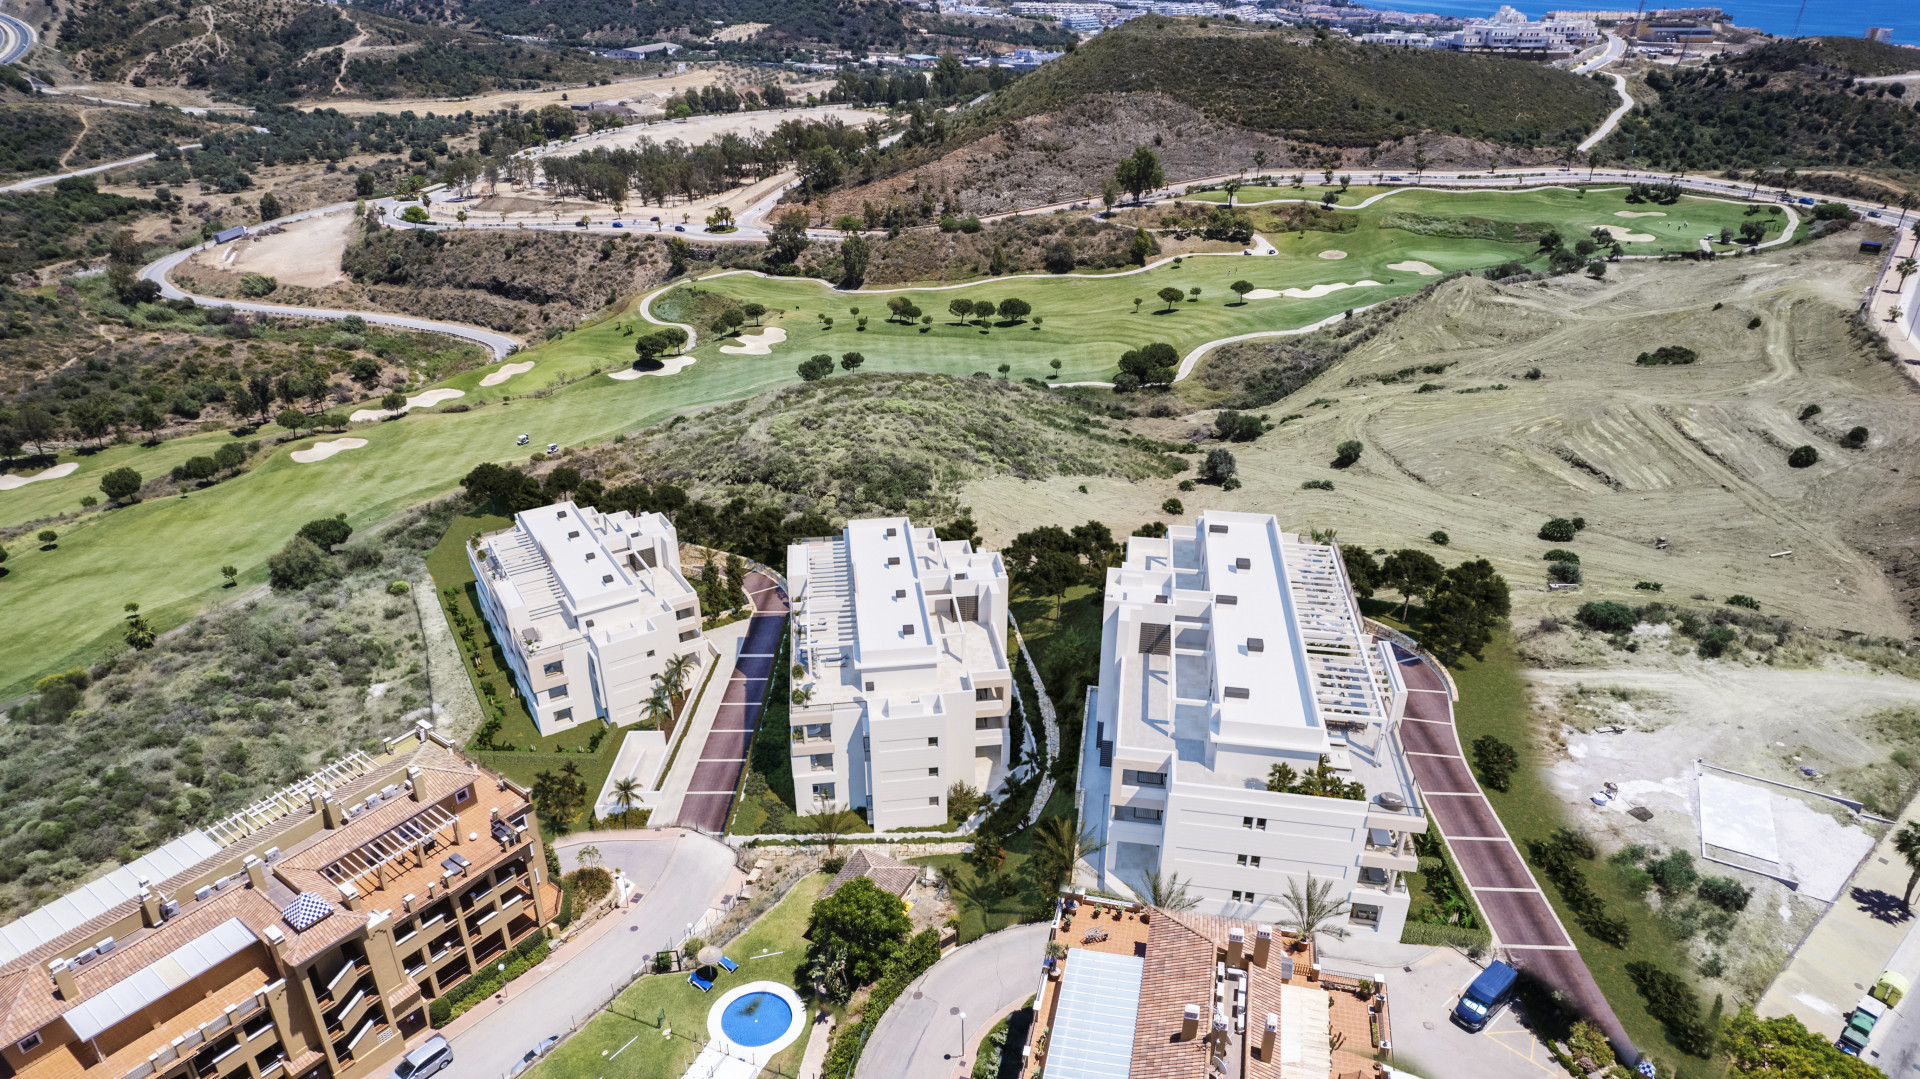 Dream Golf Calanova: Luxury residential project located on the first line of the Calanova golf course in the municipality of Mijas, Malaga. | Image 6